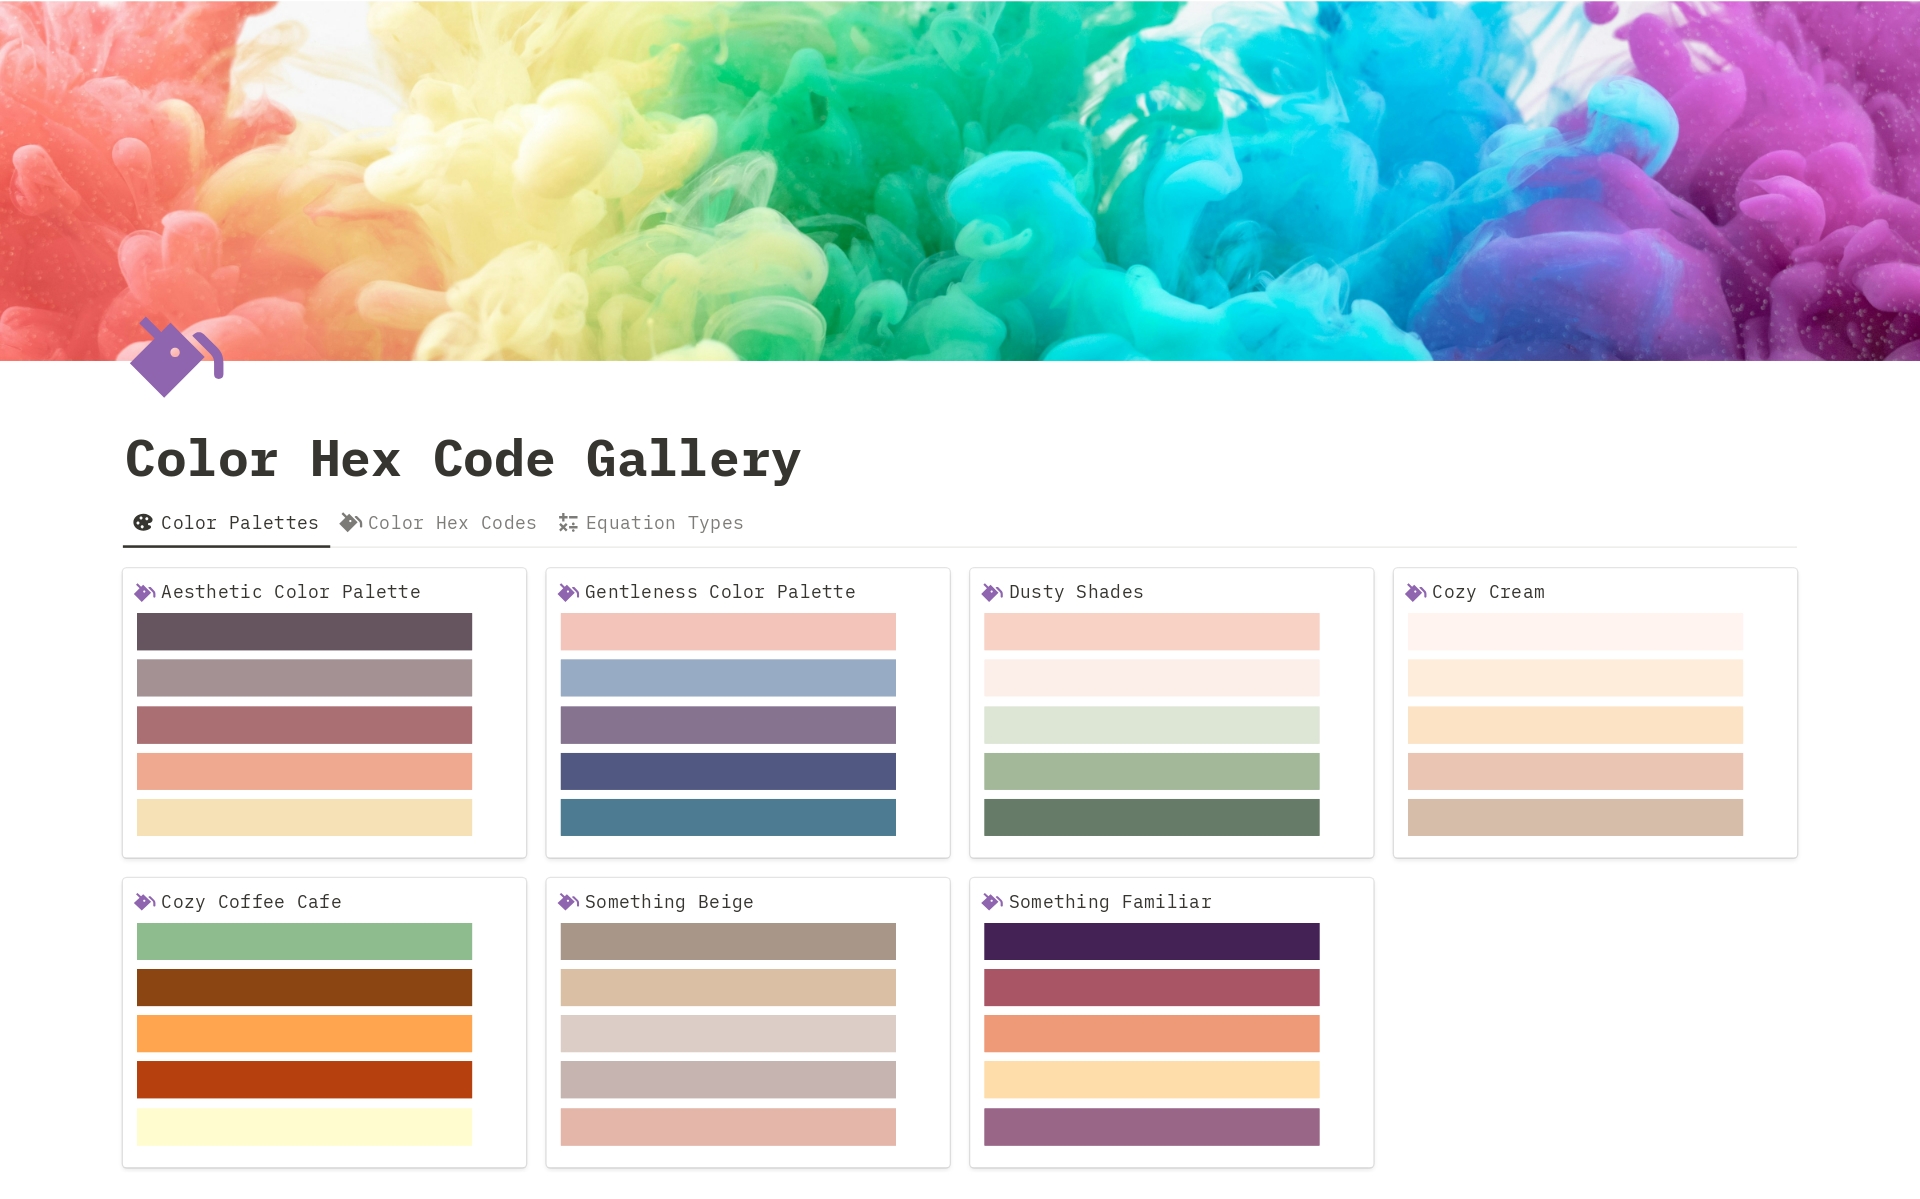 It's a great tool for working on design projects or especially to create notion templates. You can create your own color palettes too and it's a great way to store your favorite colors you often use.

Have fun working with it!